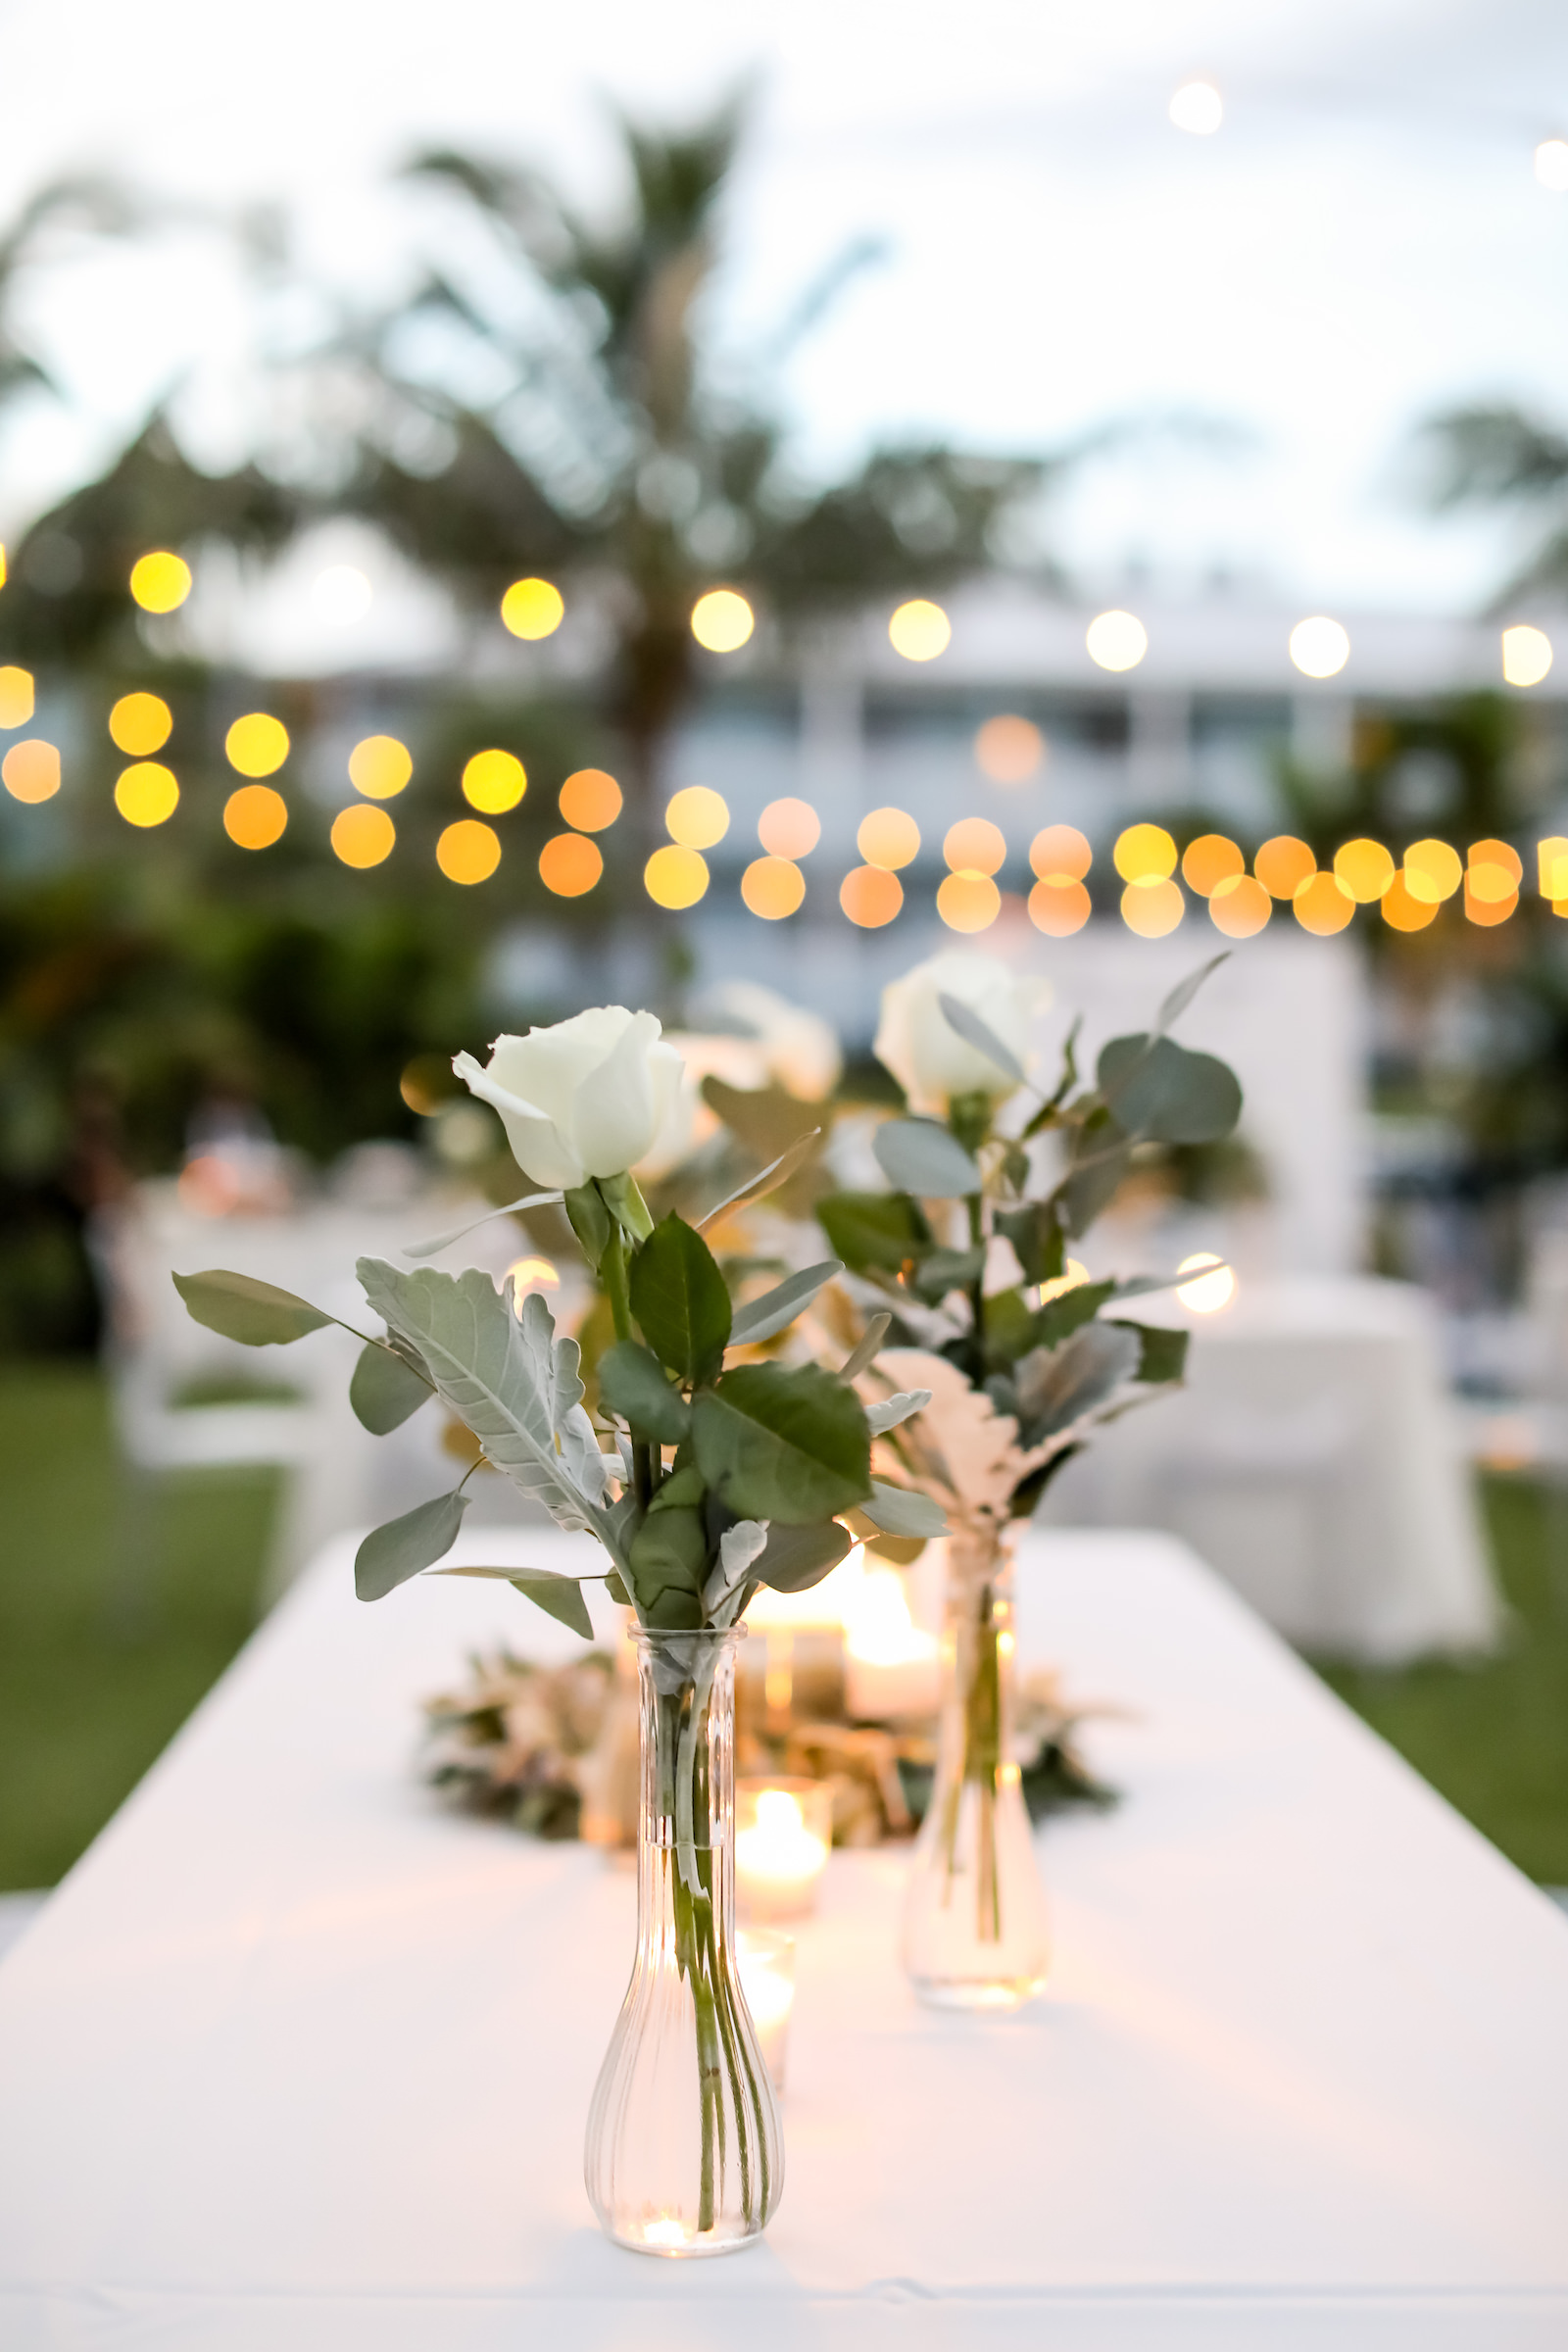 Vintage Inspired Florida Wedding Ceremony and Decor, Low Floral Centerpieces with Clear Glass Votives and Single Ivory Roses with Greenery, Candlelight | Sarasota Wedding Planner Kelly Kennedy Weddings | Florida Wedding Photographer Lifelong Photography Studio